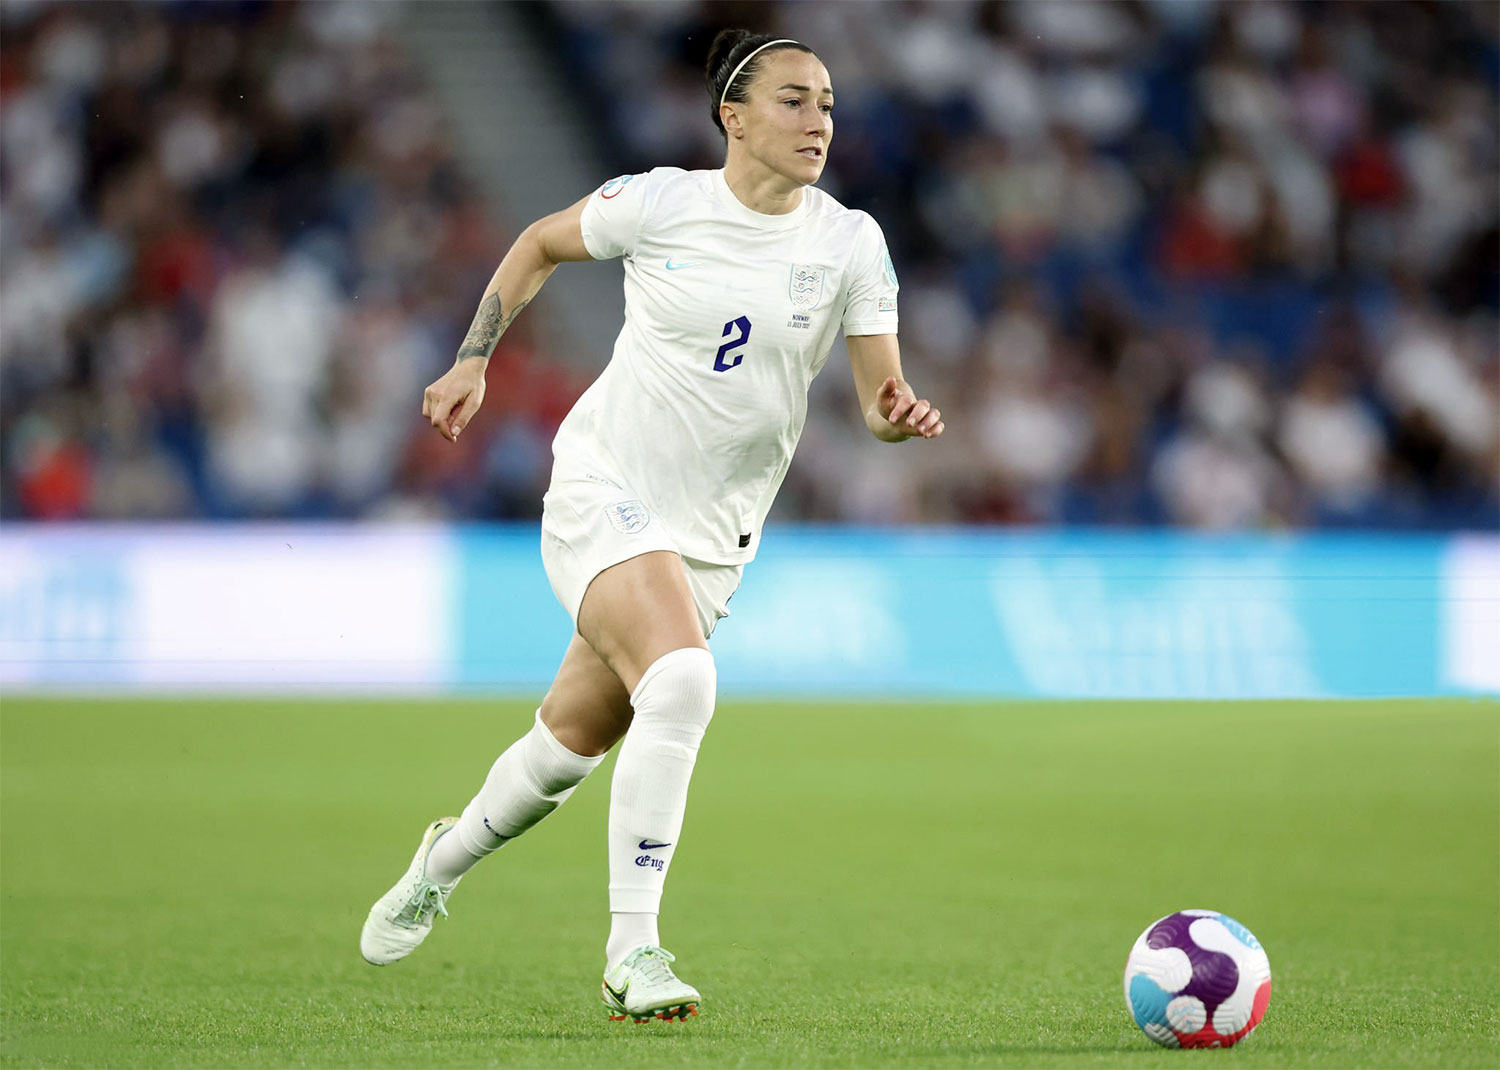 England's Lucy Bronze on the ball during the 2022 UEFA Euros. (Getty Images)